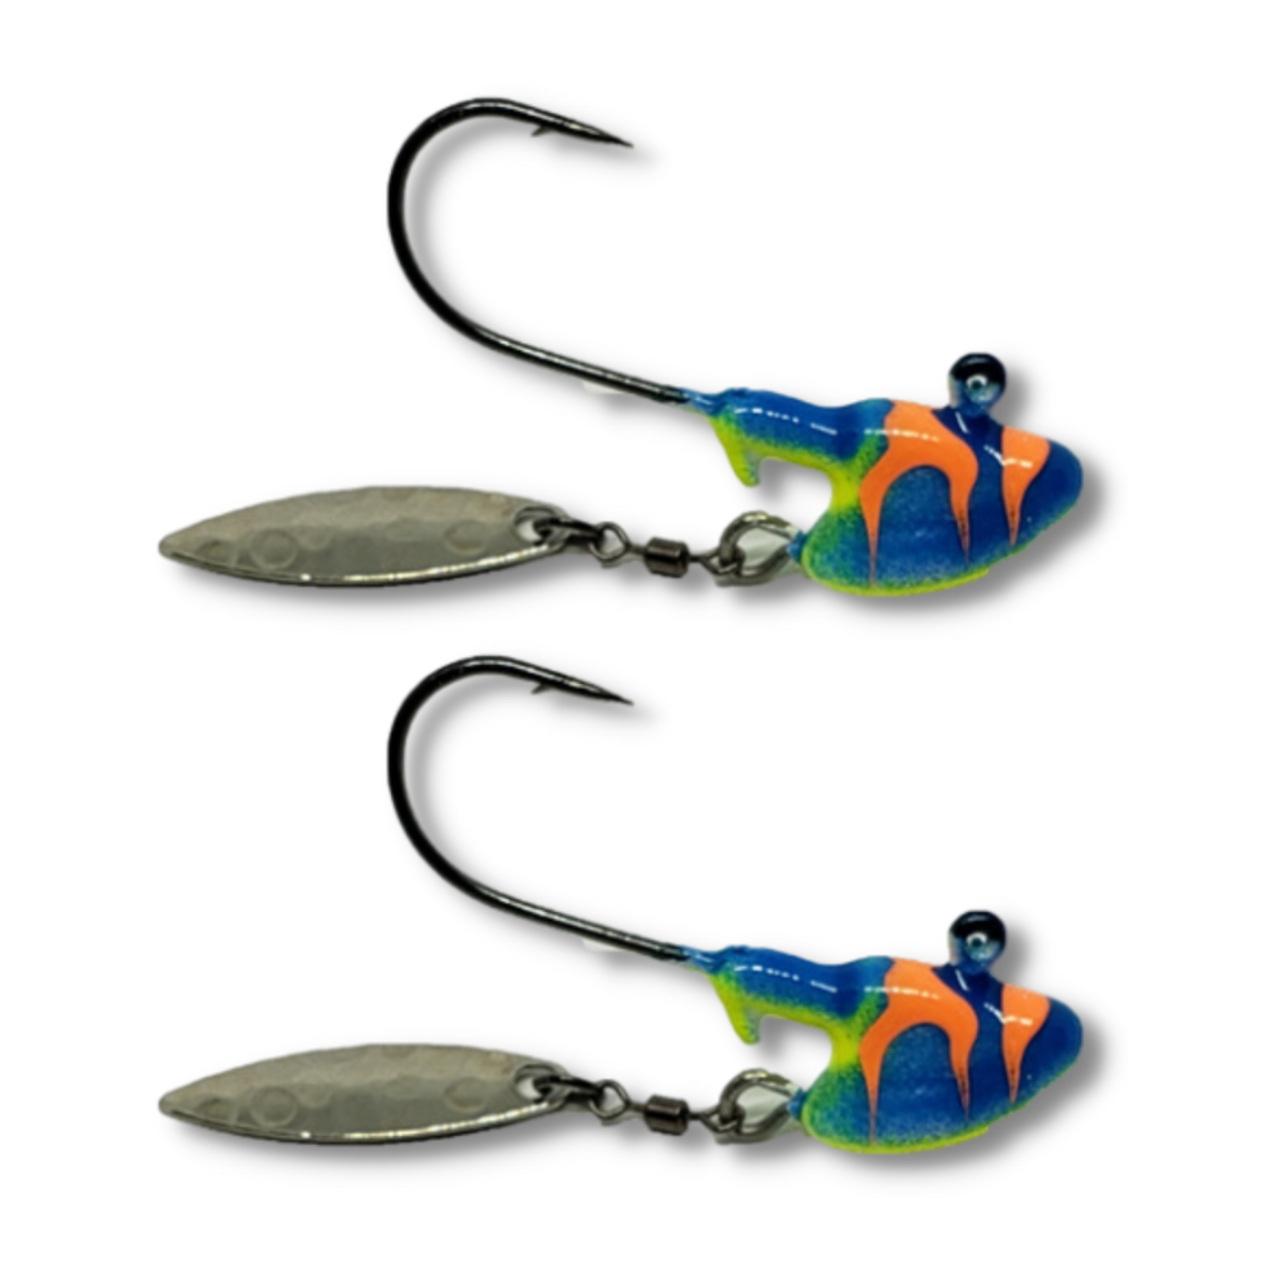 The GLOW CYCLONE jig will drive fish crazy, the FLASH and the Sparkle with only make the fish go crazier for your bait. These are in 1/4 oz they work great for  PIKE,WALLEYE,GREENBACKS,MUSKY,LAKE TROUT. These are poured on e super strong Eagle Claw hook in Black Nickel for EVEN more FLASH. 